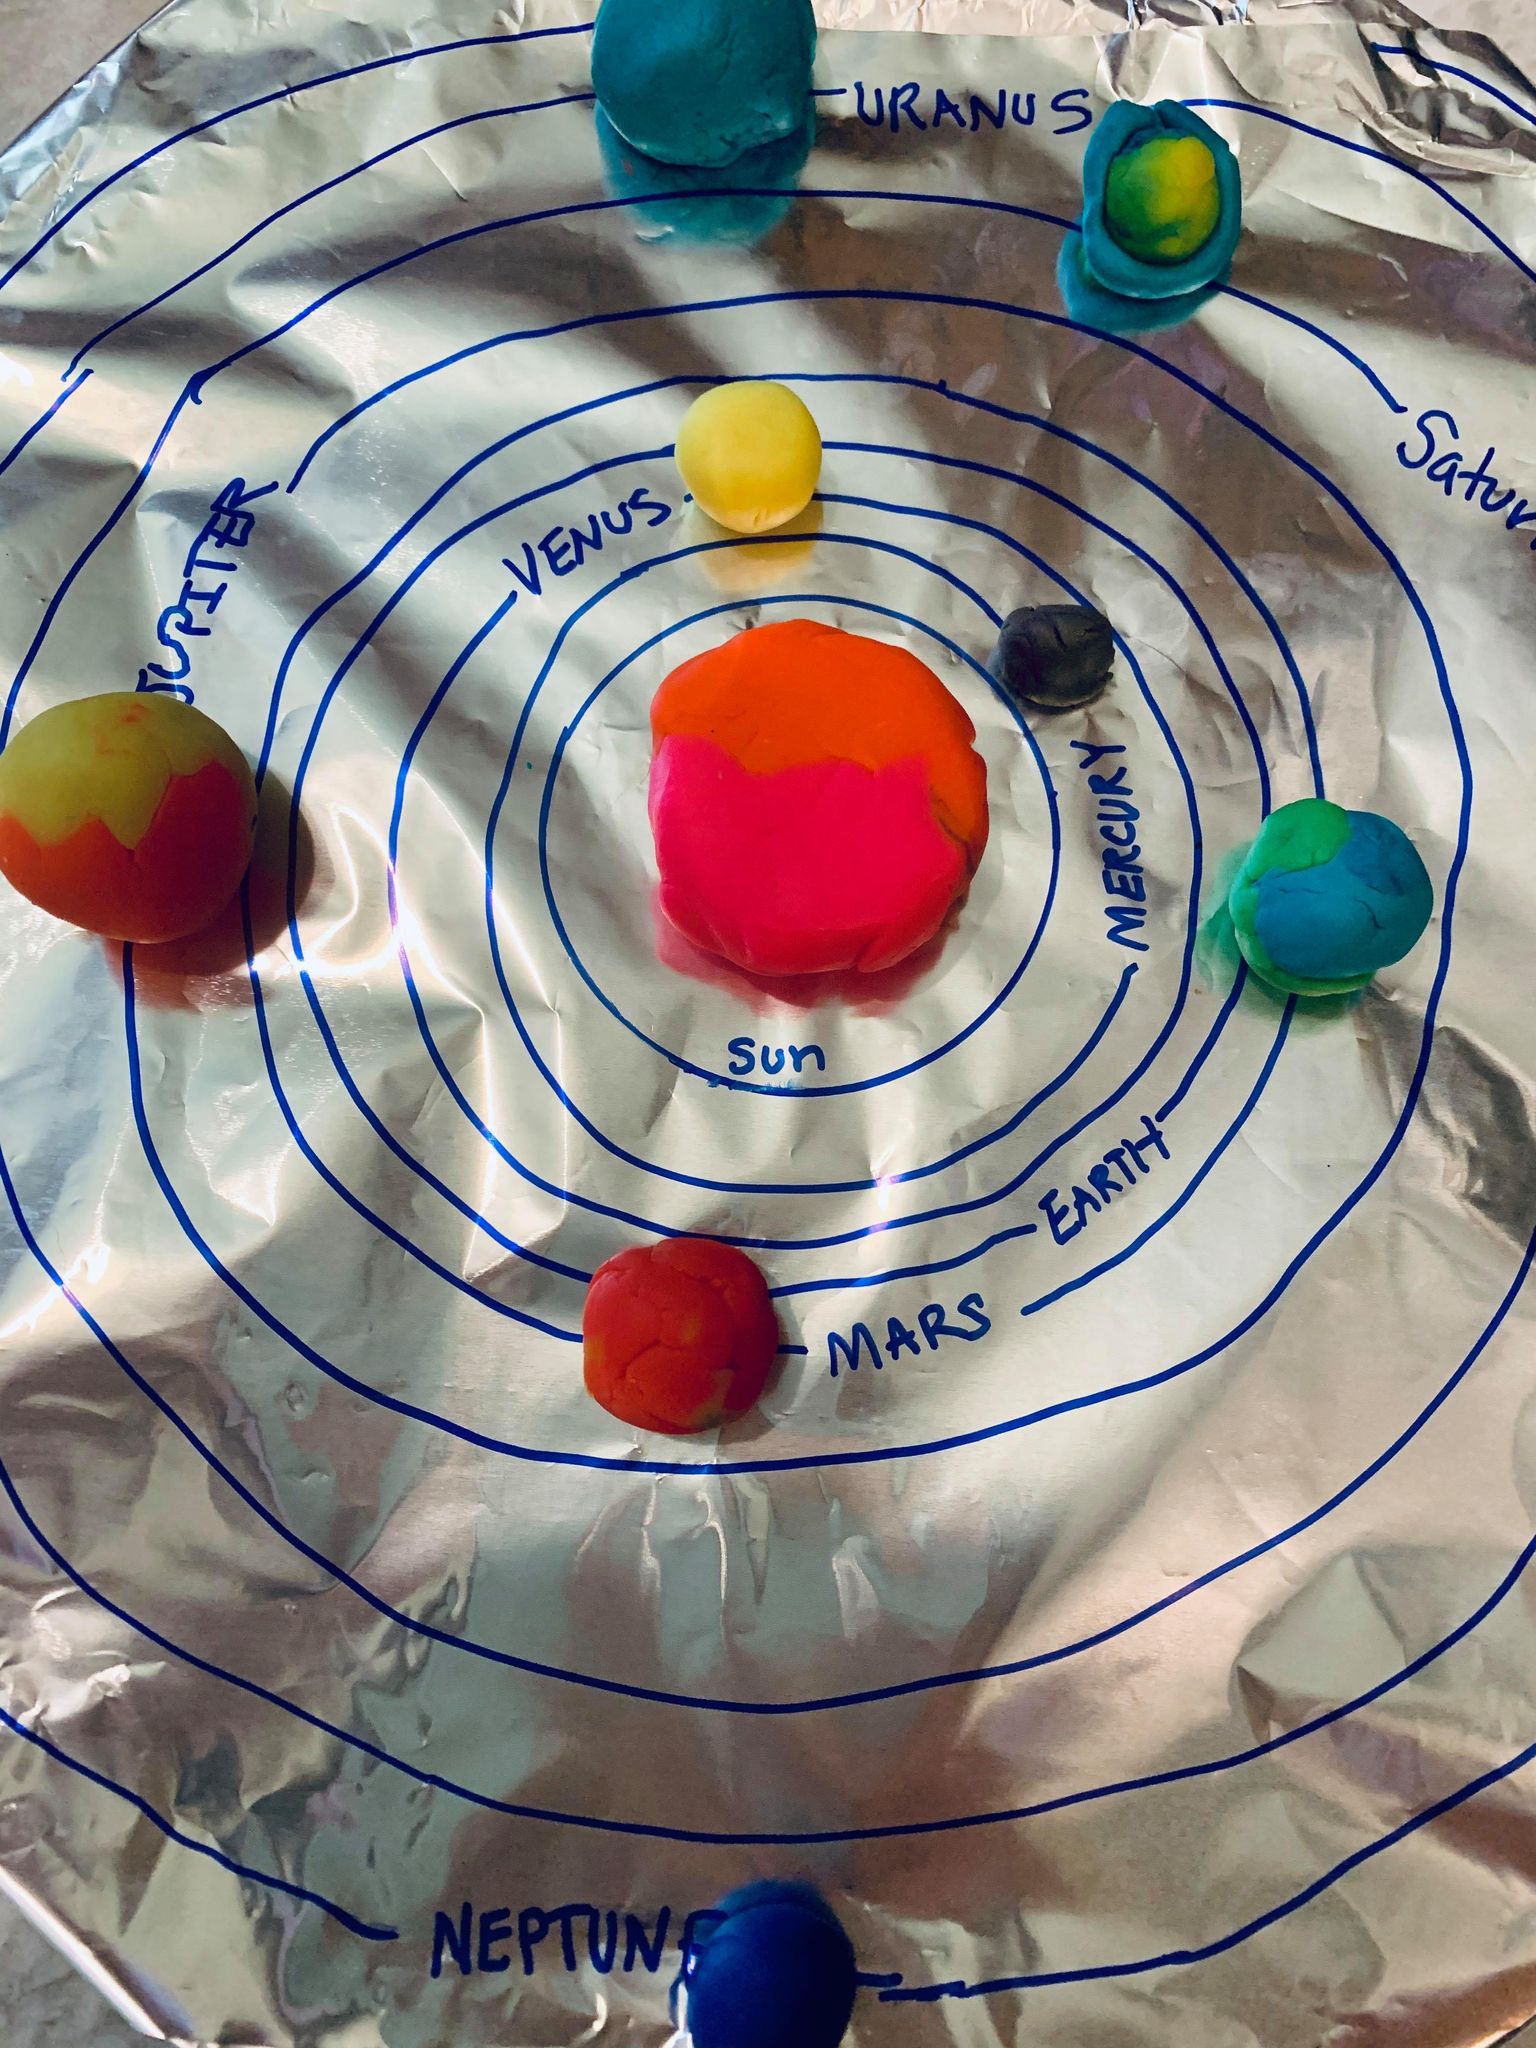 solar system interactive lesson